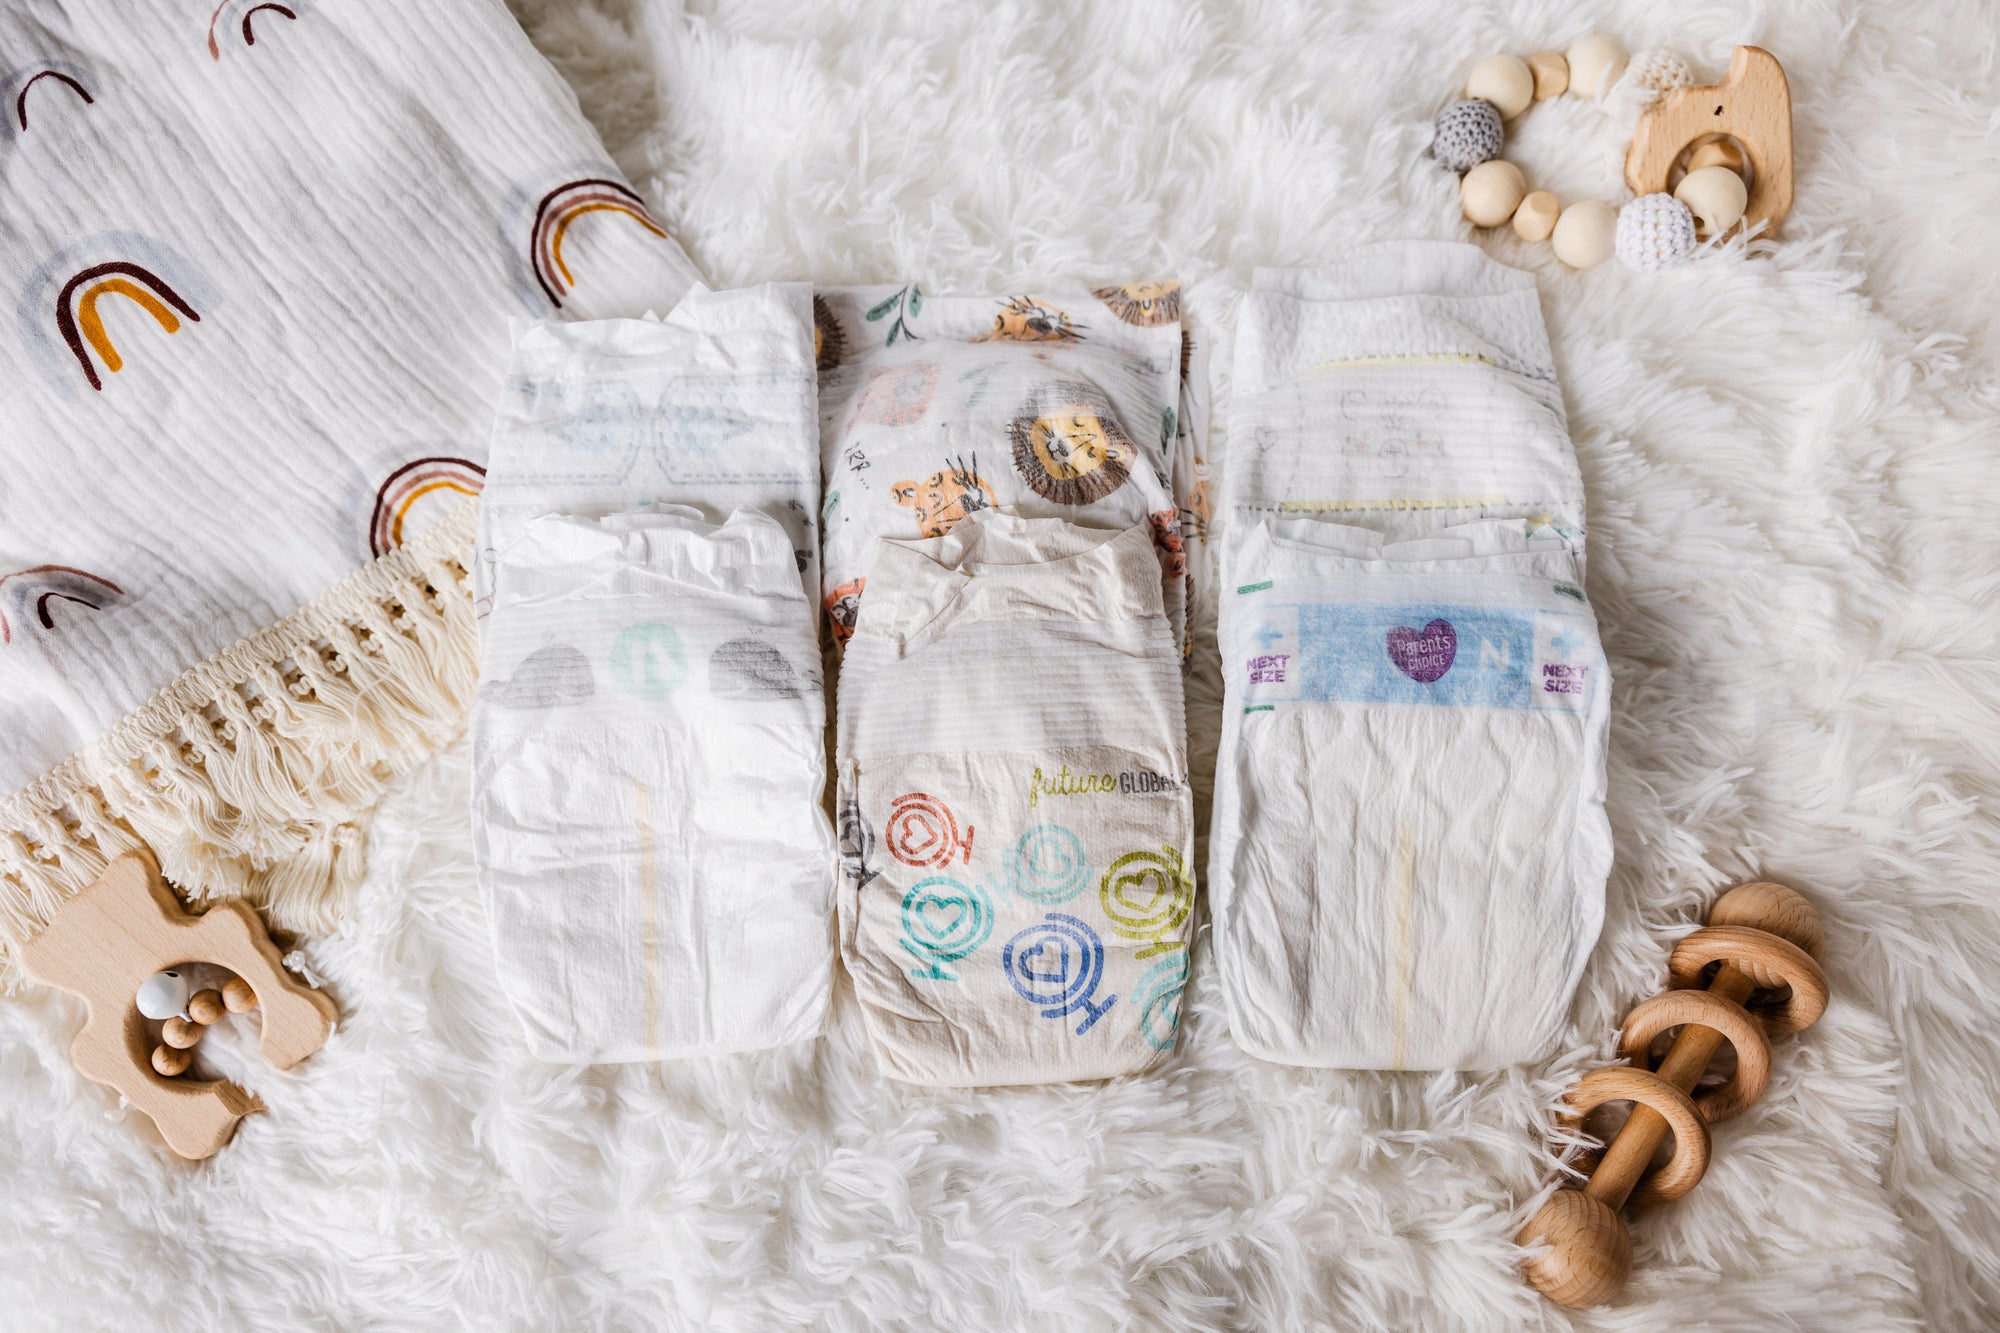 Newborn Babes Diaper Sampler Package: 6 Diaper Sample Packs of newborn diapers including Huggies Little Snugglers, Pampers Swaddlers, Seventh Generation, Hello Bello, Up & Up and Parent's choice